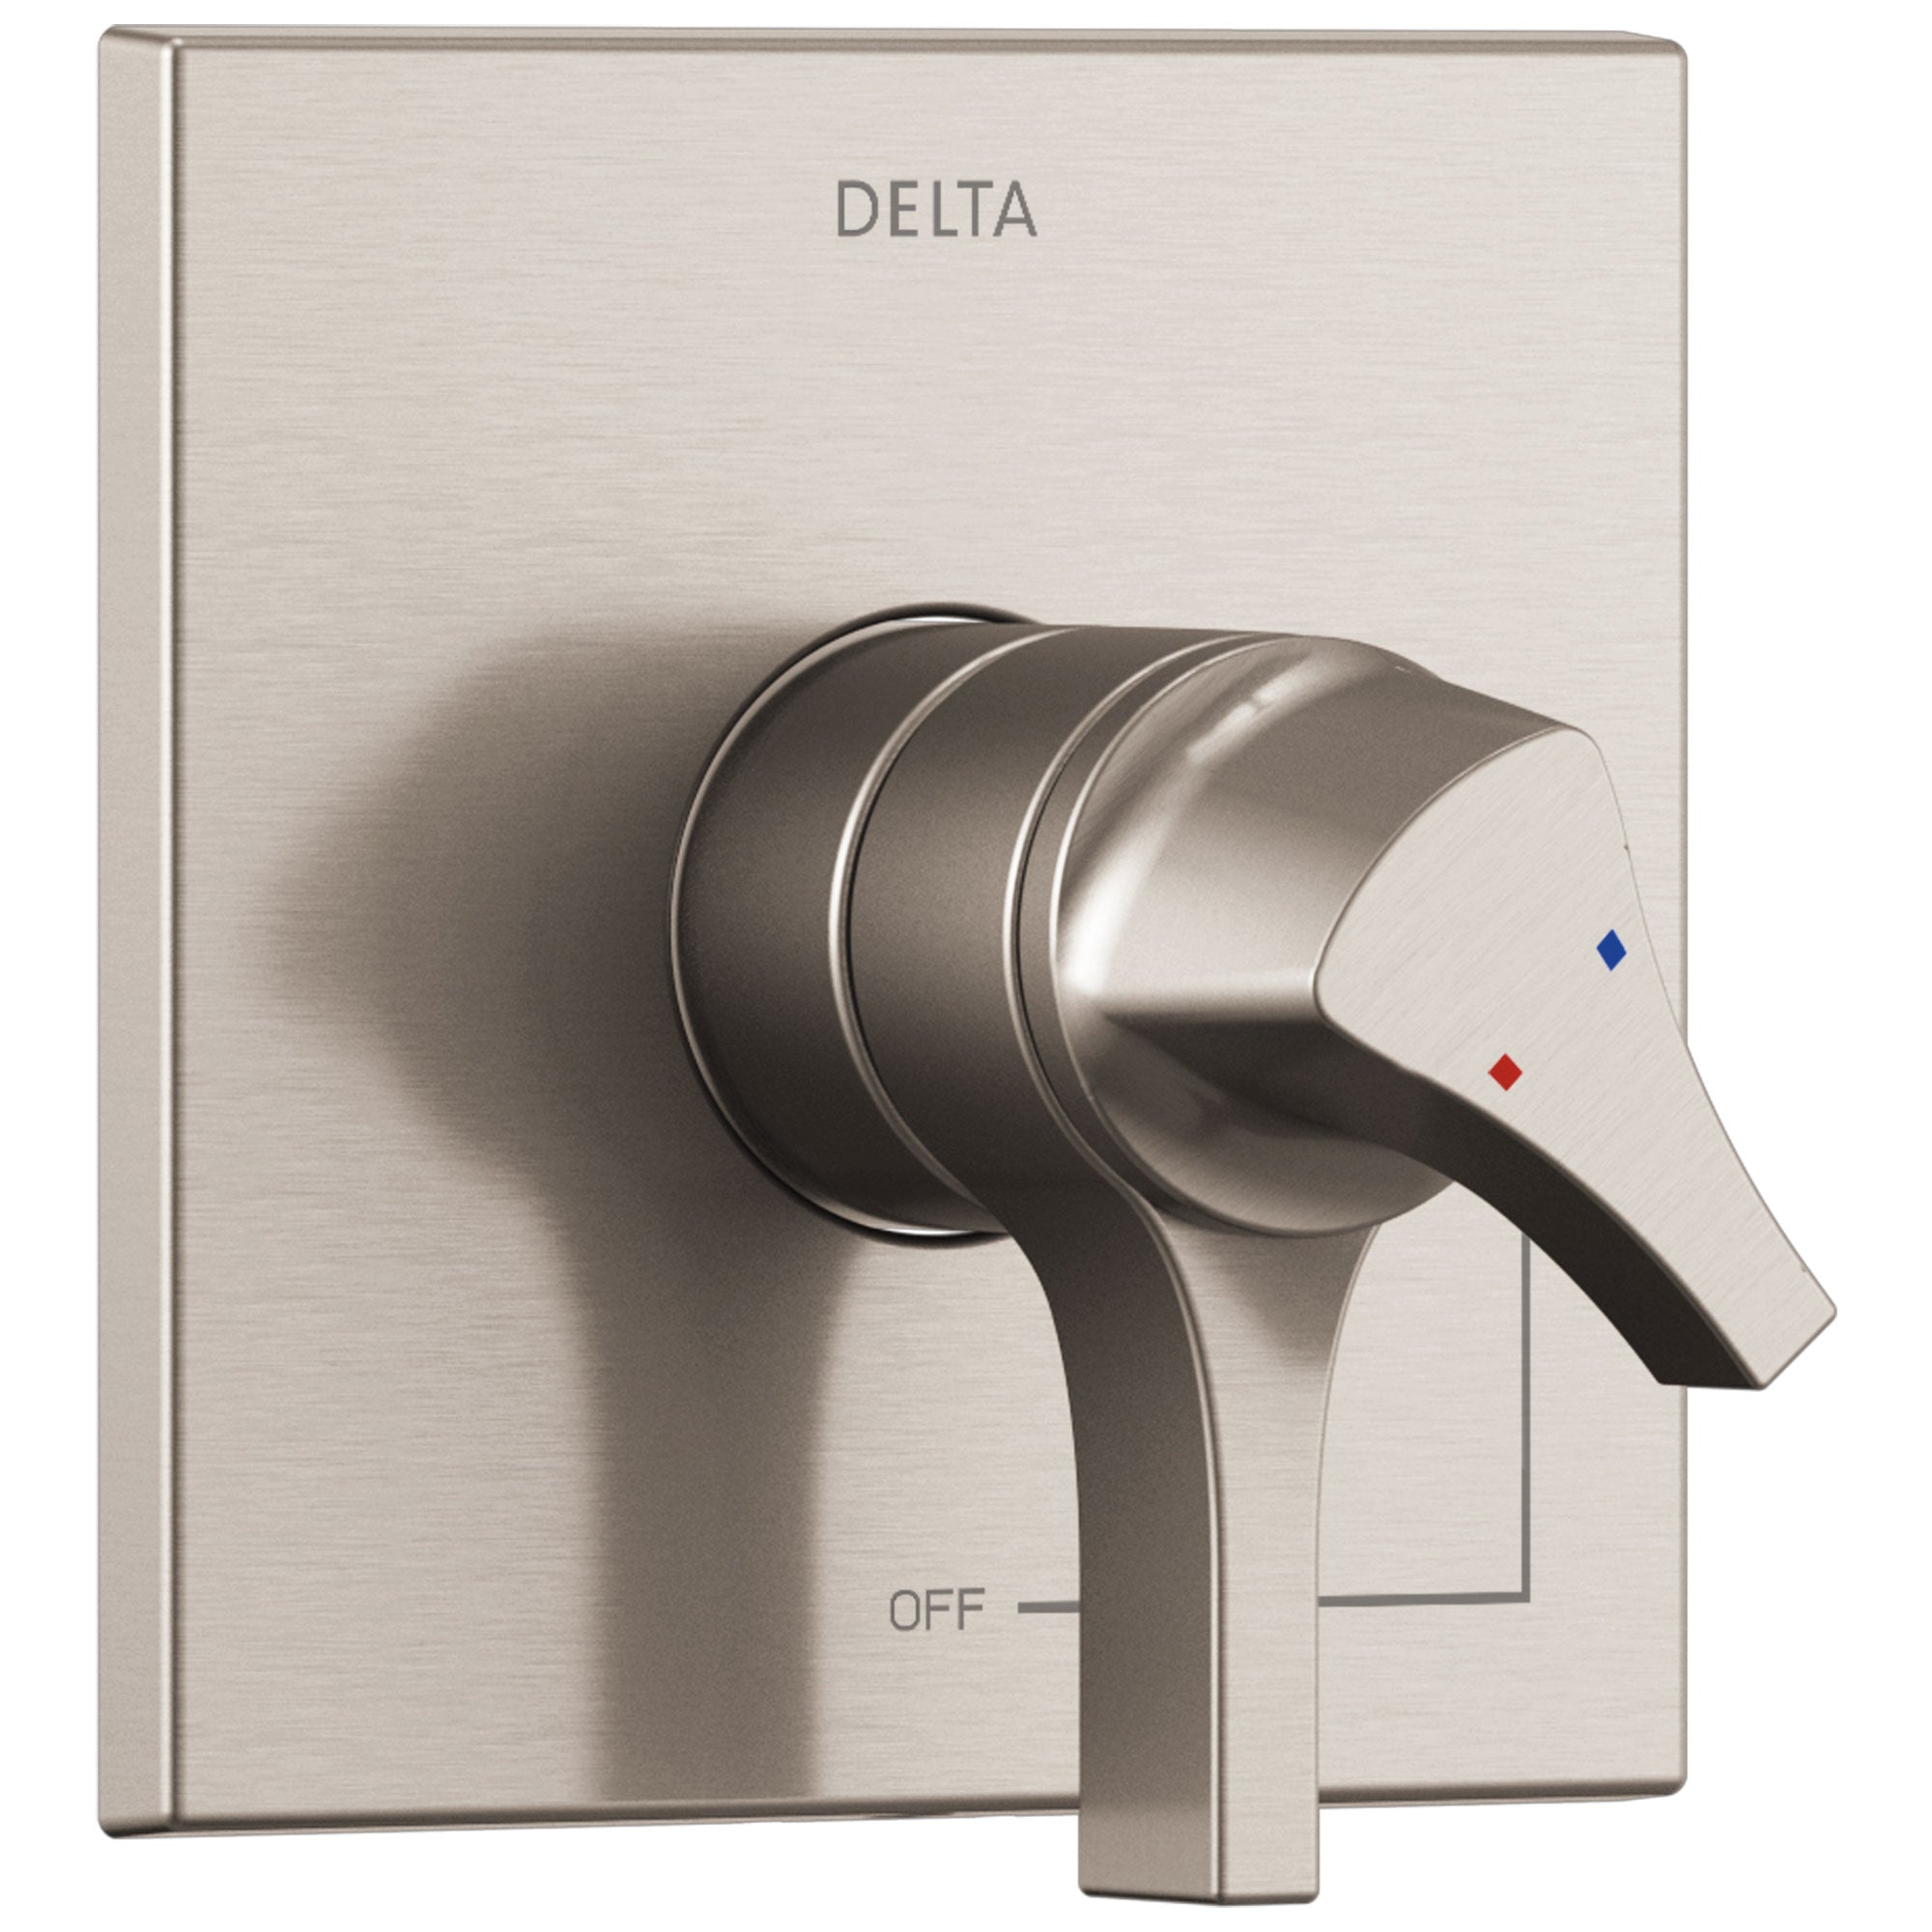 Delta Zura Collection Stainless Steel Finish Monitor 17 Dual Temperature and Water Pressure Shower Faucet Control Handle Trim (Requires Valve) 743964